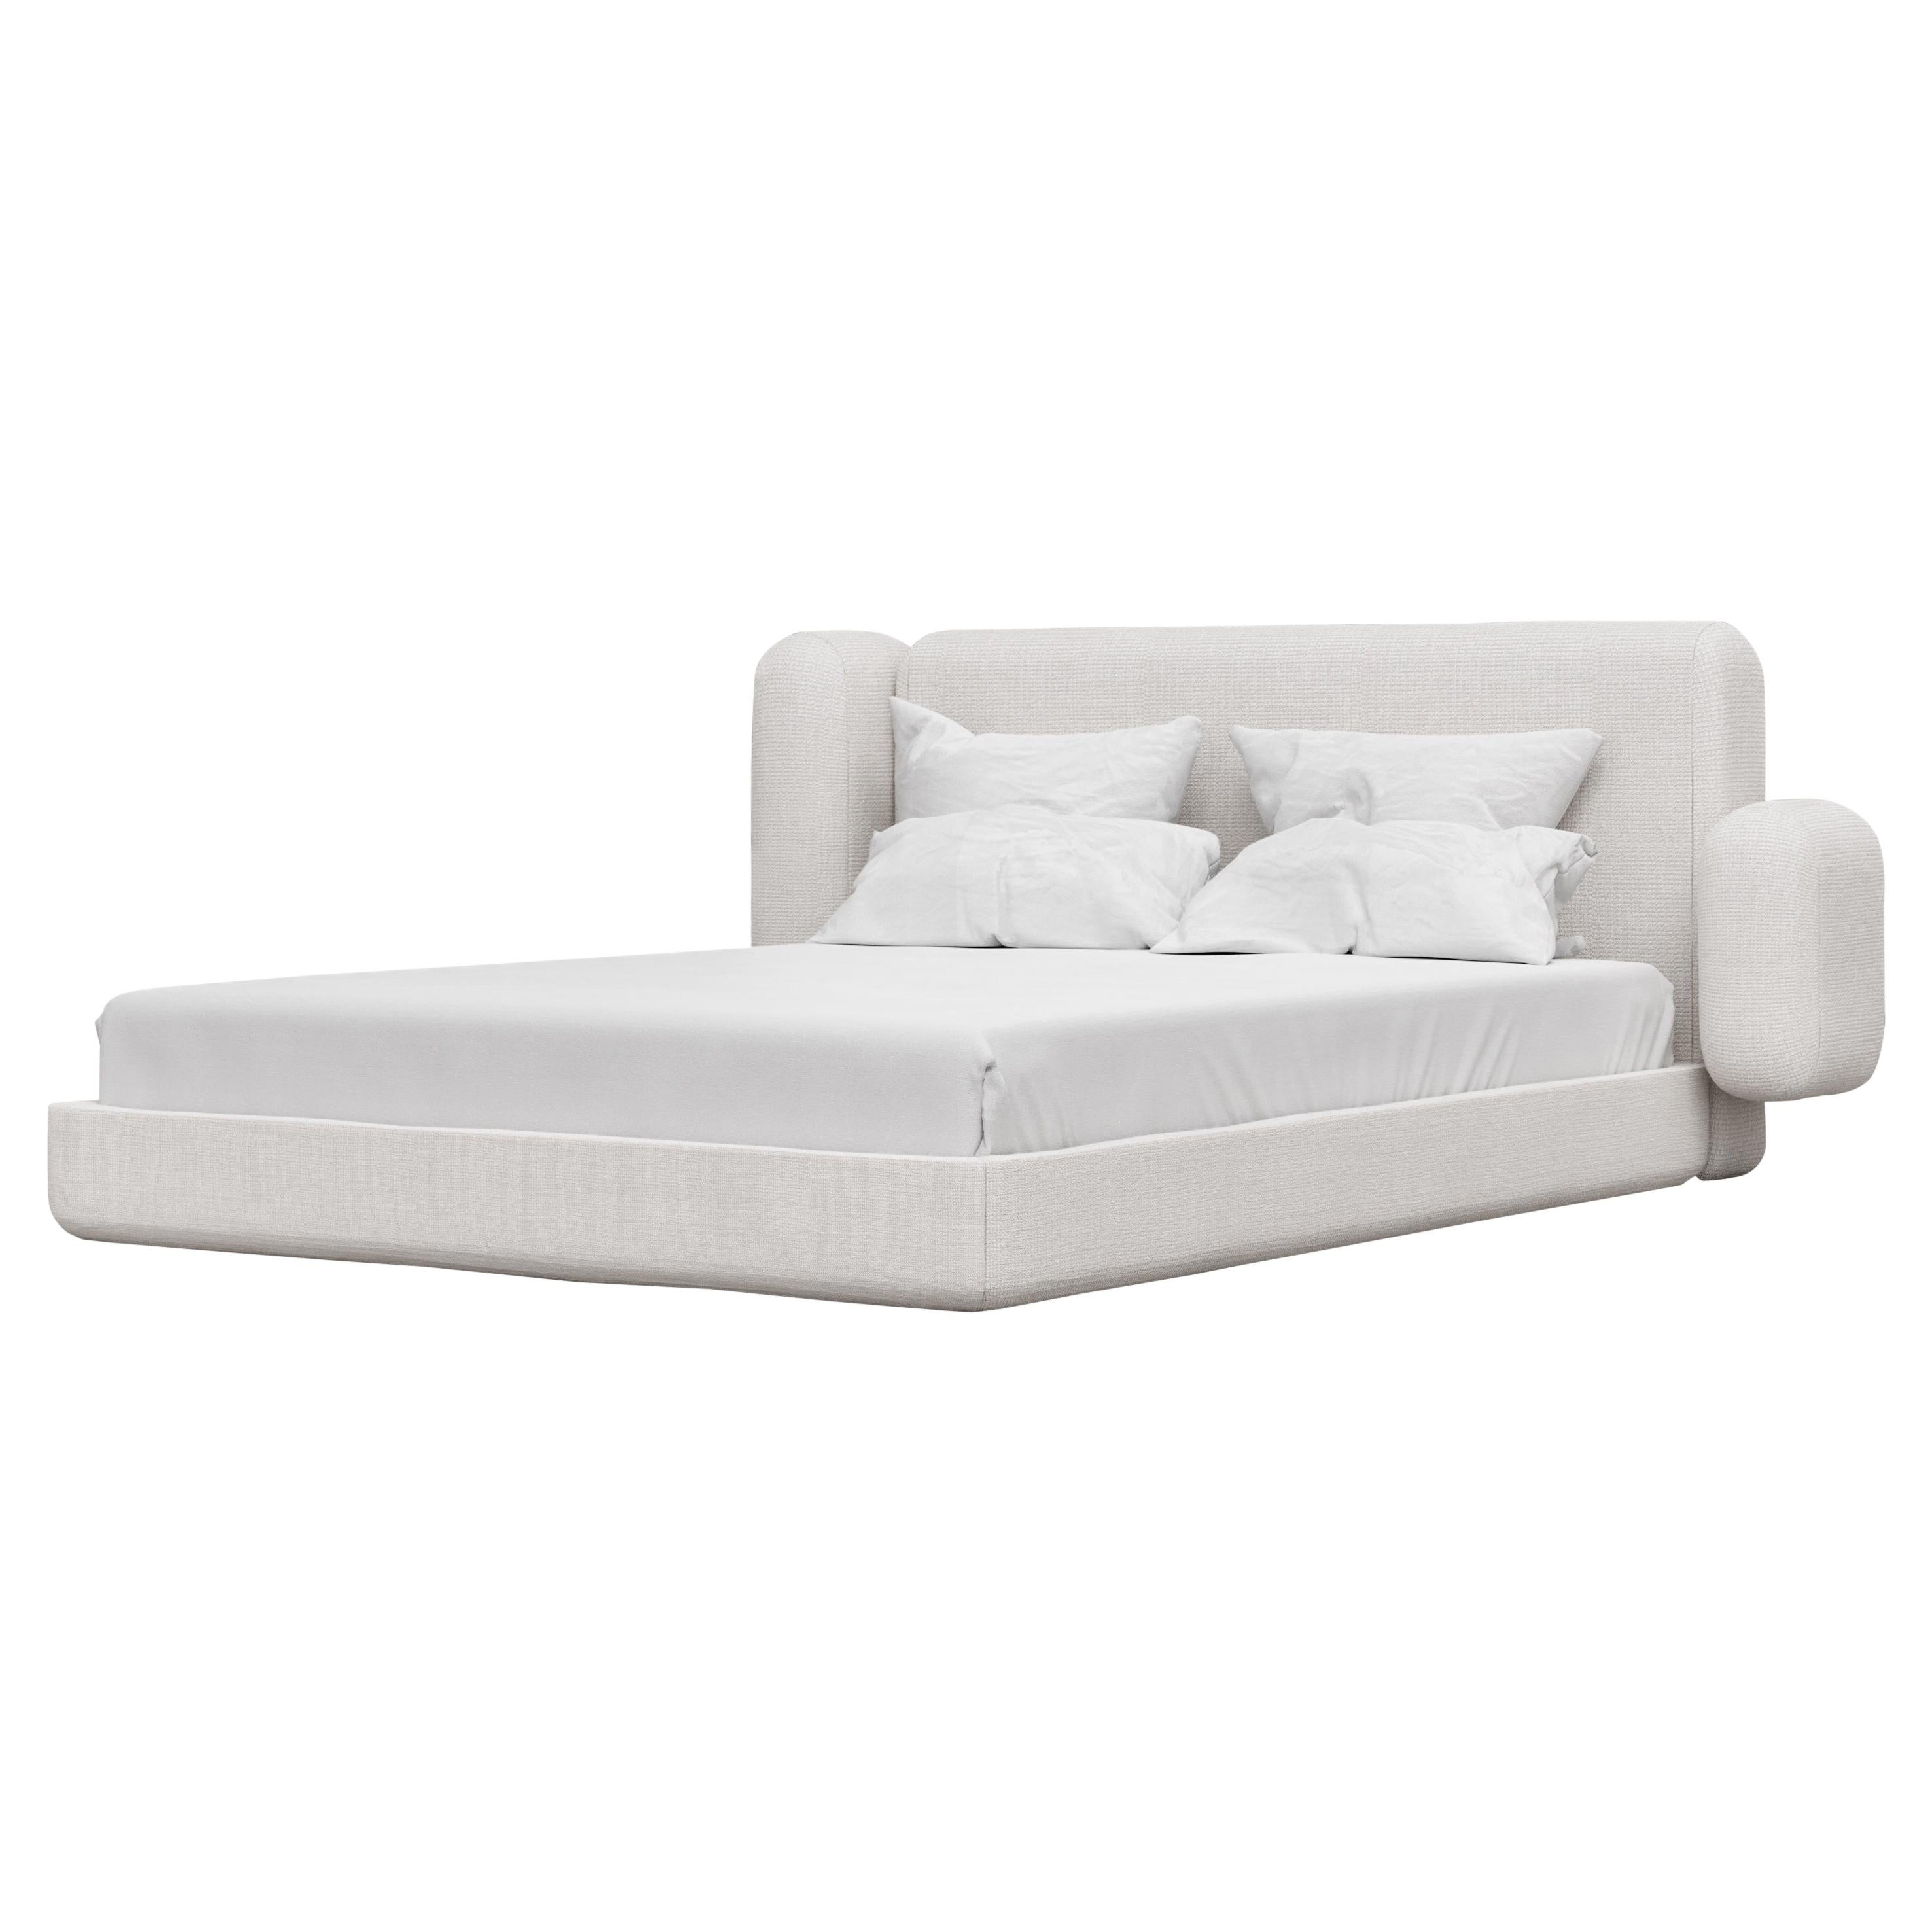 ASYM BED - Modern Asymmetrical Bed in Curly Lamb Boucle in Soft White